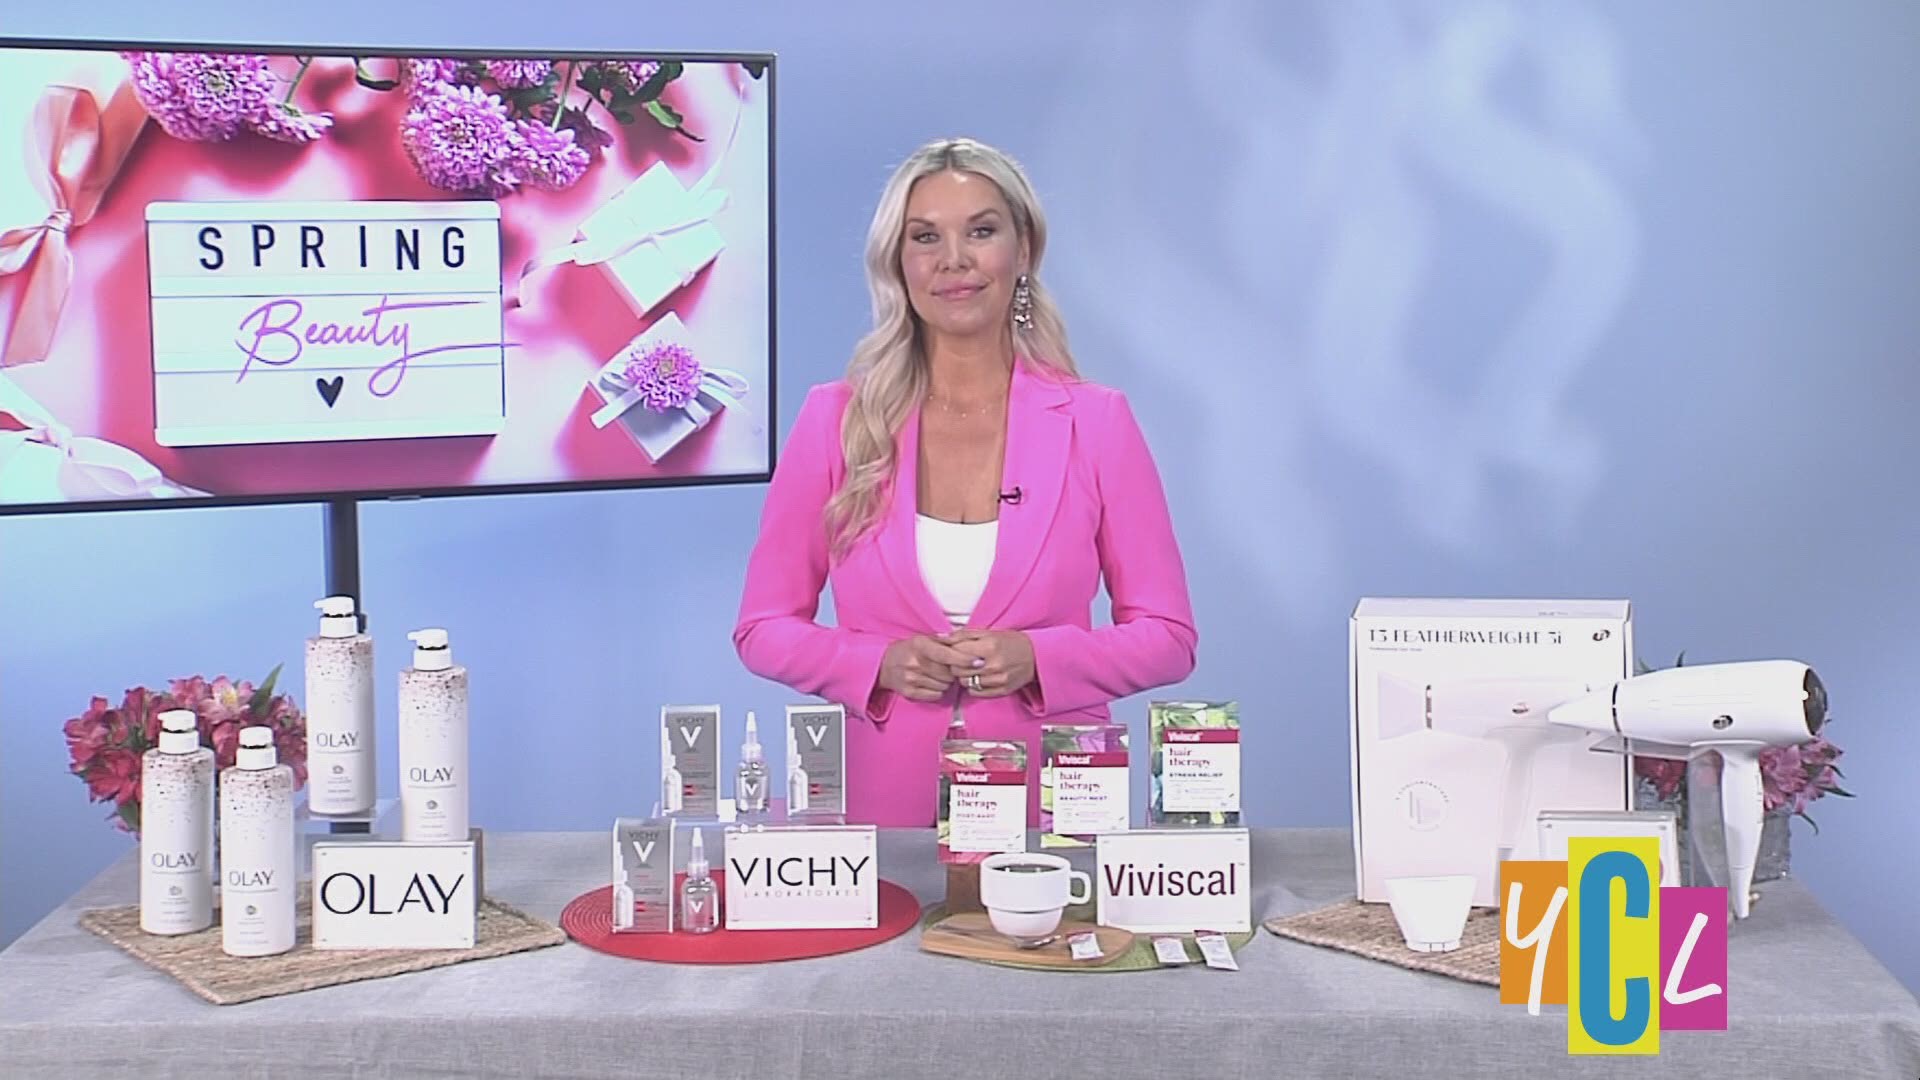 Beauty expert Emily Loftiss shares her secrets for affordable everyday glam this Spring. This segment was paid for by OLAY, Vichy Laboratories, Viviscal™ and T3.